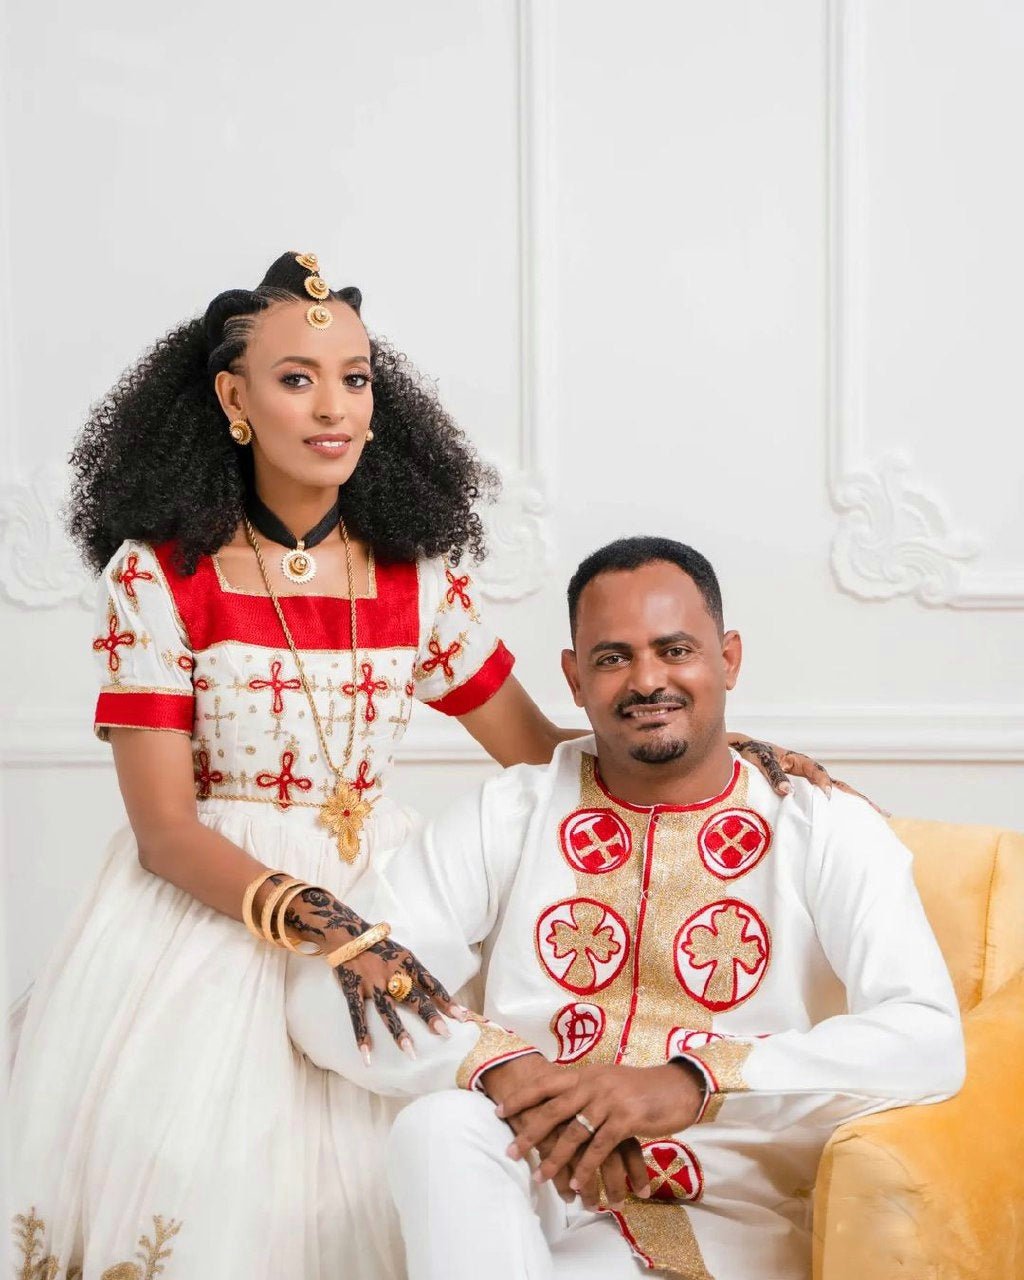 Radiant Red Habesha Couples Outfit Vibrant Habesha Couples' Attire / Includes man's pants and shoes